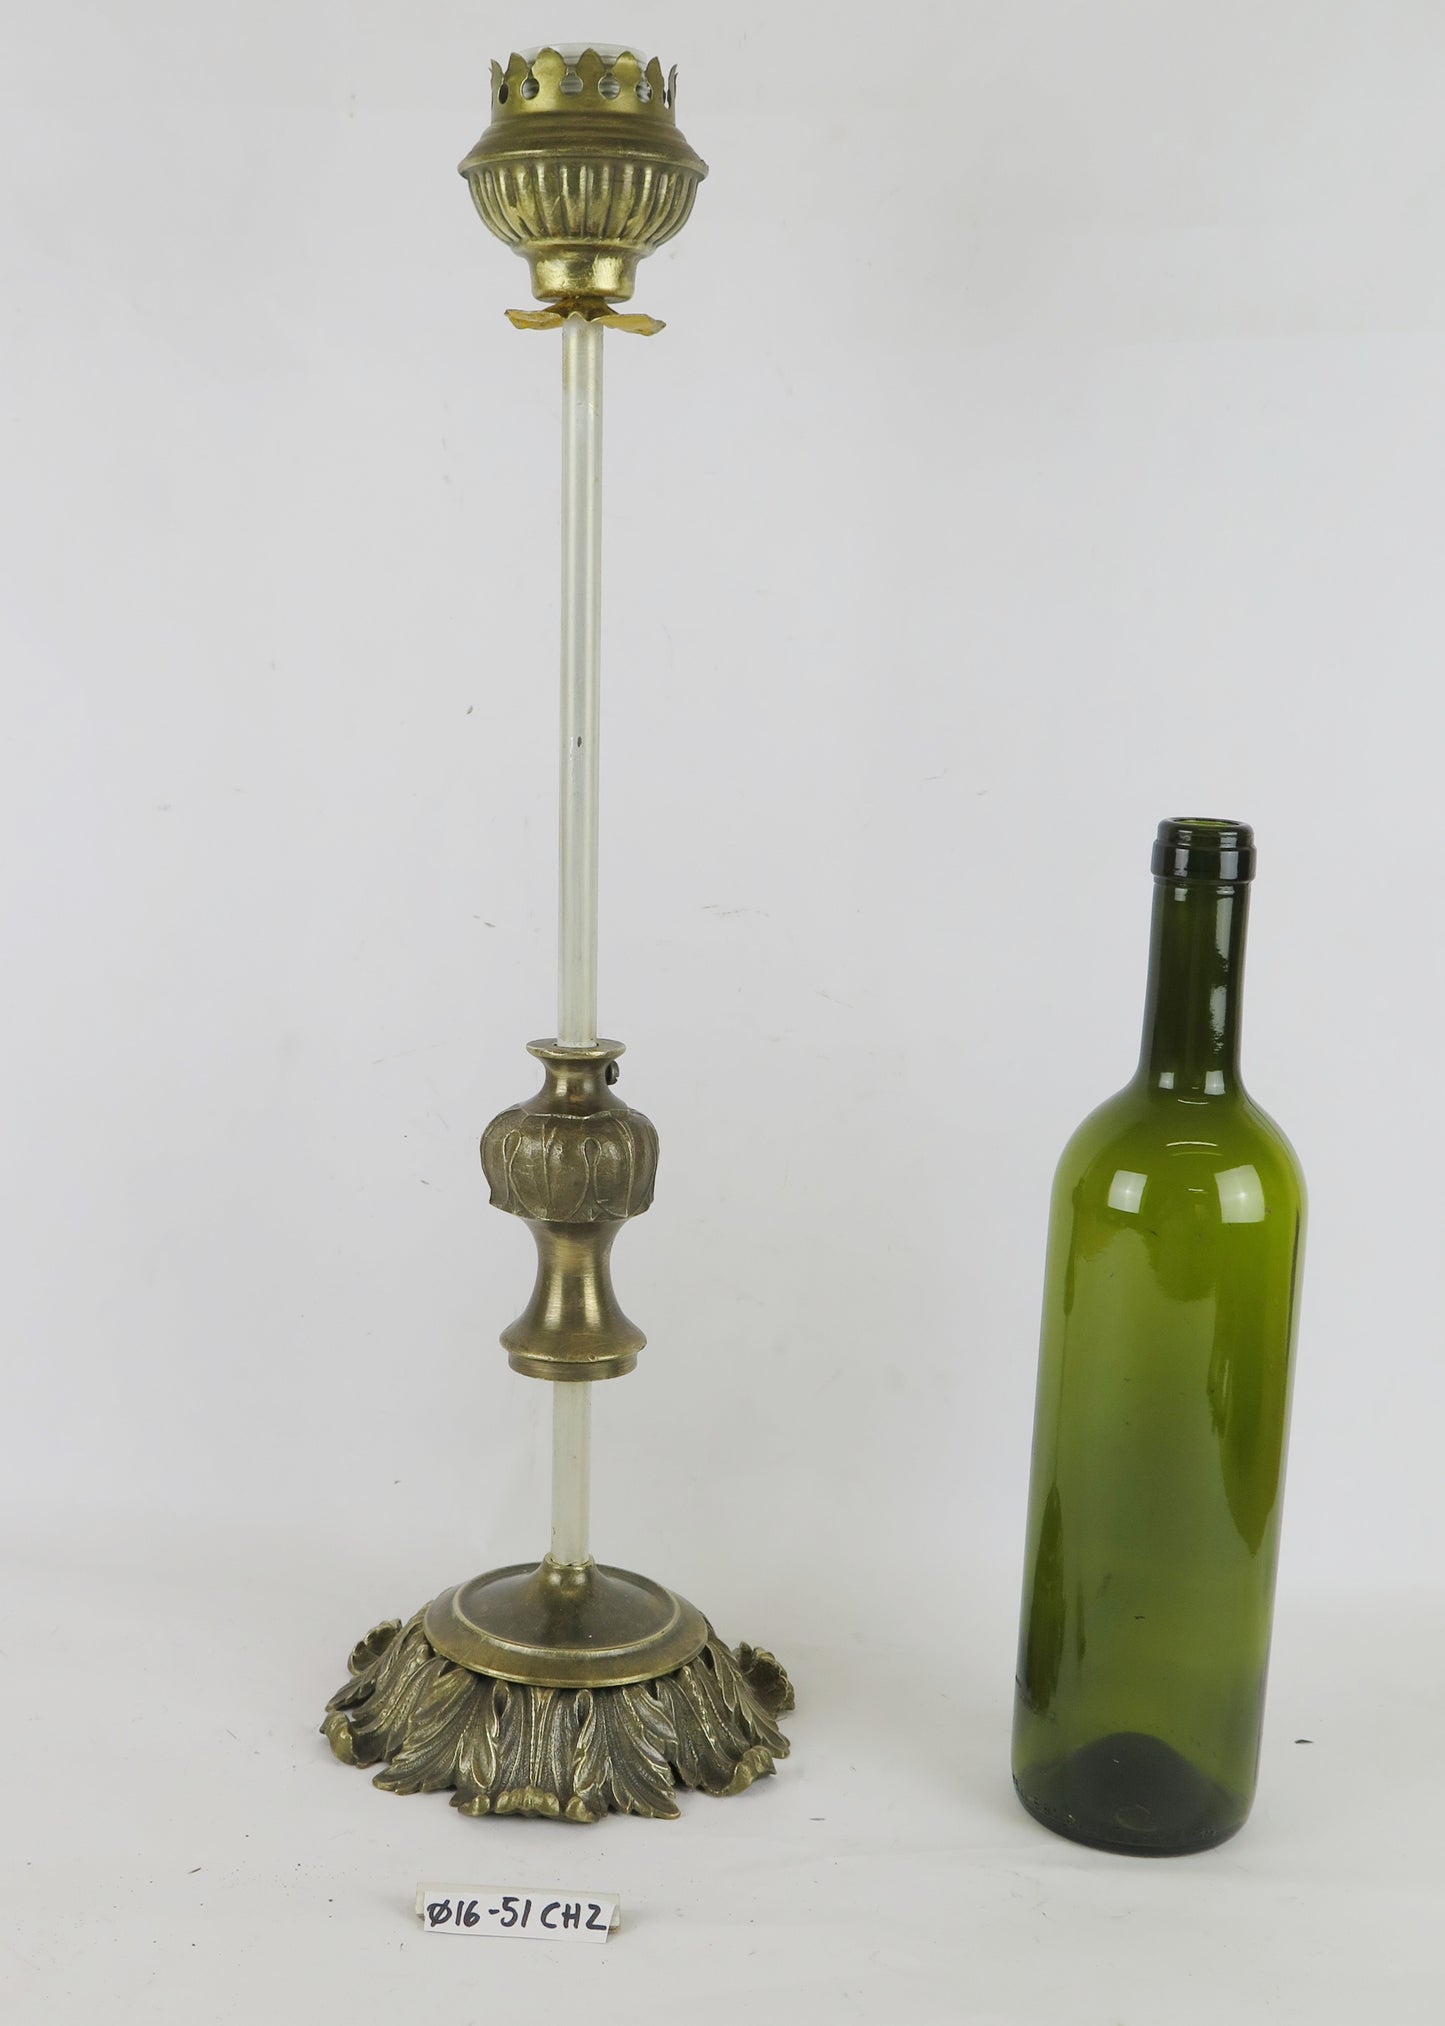 ABAT-JOUR VINTAGE CH2 ARTISTIC WROUGHT IRON AND BRONZE TABLE LAMP